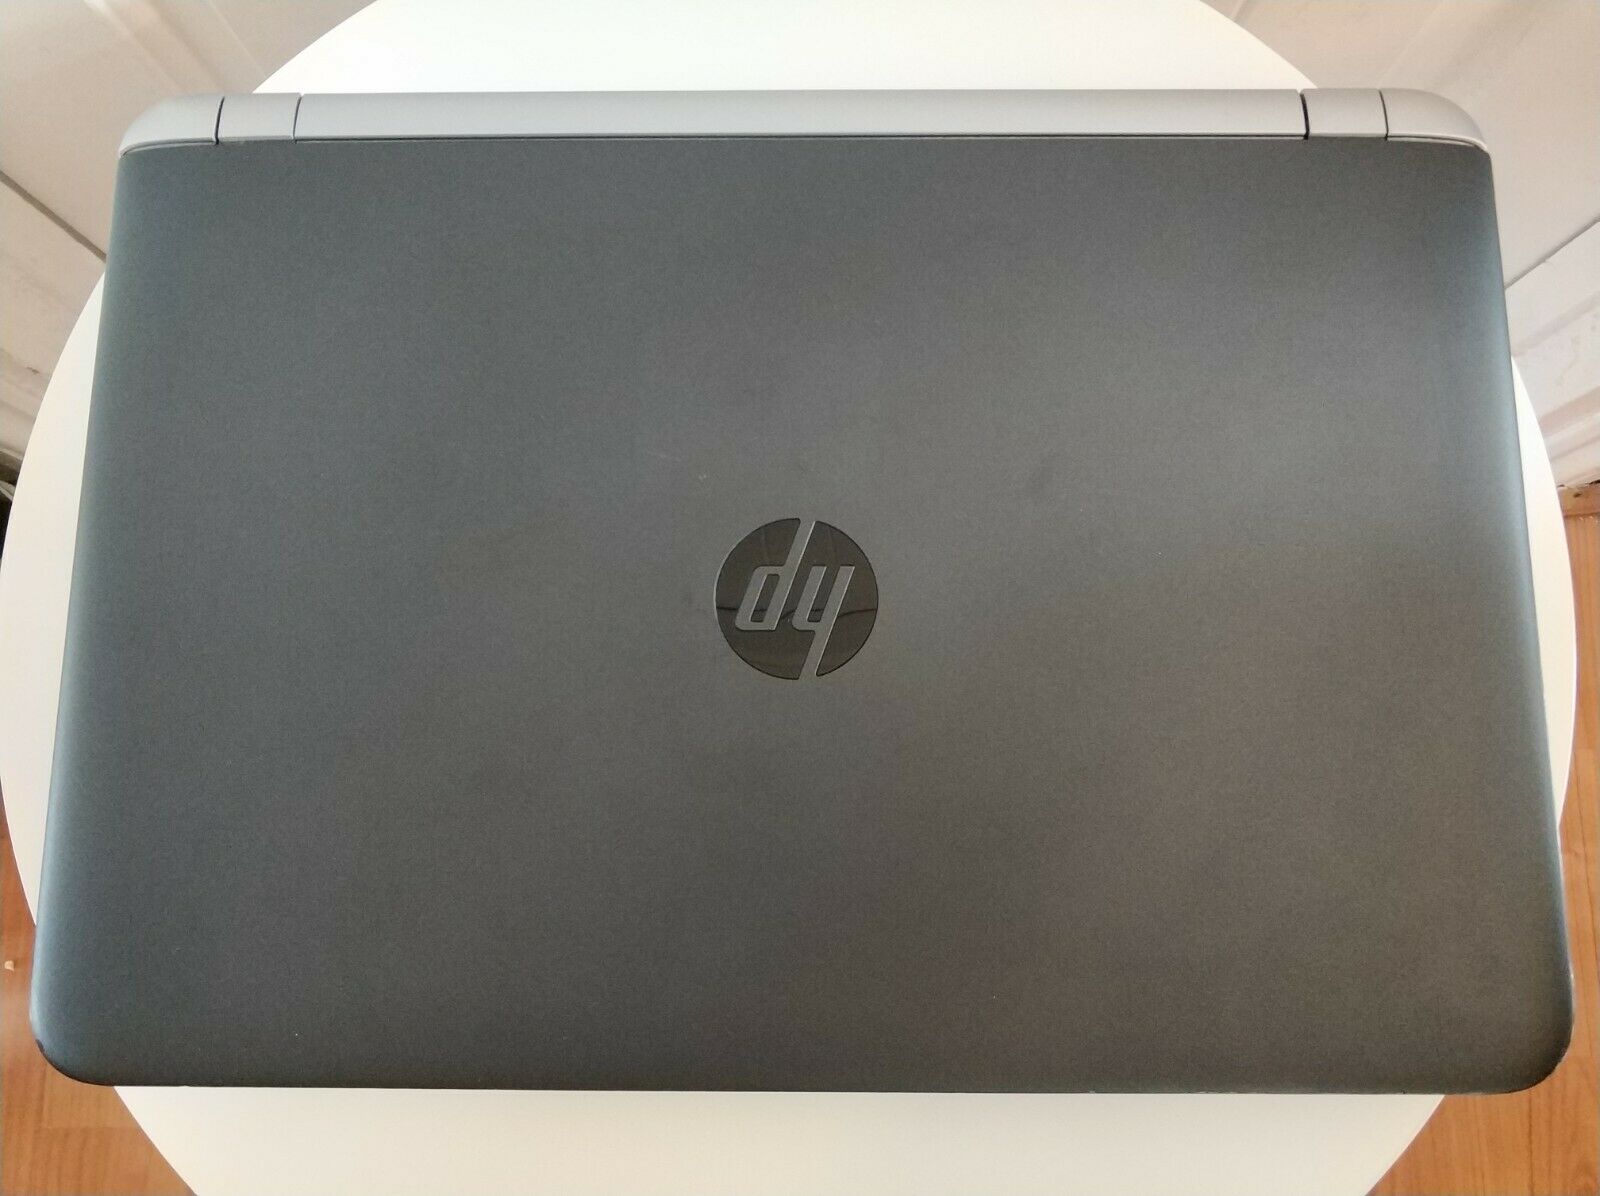 HP ProBook 450 G3 15.6"Laptop HDD/SSD 500GB ,Intel Core i5-6200U 2.30GHz 4.0GB DDR3 uk used laptop, london used laptop , Original laptop , computer shop in lagos , laptop for sale in lagos , computer stores in lagos nigeria , wholesale computer shop in lagos nigeria , laptop supply shops/store in lagos , Hp laptop for sale , dell laptops for sale , buy laptops online, lenovo laptop for sale , shopeinverse store in lagos , shopinverse computer , shopinverse laptops , note books computers , second hand laptop, cheap laptop for sale in lagos , laptop repair shop in lagos, gbn mobile computers , gbn mobile laptops /computers store, computer village lagos ikeja shops , laptops for sale in computer village , cheap laptops in computer village , laptop warehouse in lagos nigeria, computer warehouse in ikeja computer , buy/swap laptops in ikeja computer village , laptop pay on delivery in lagos ikeja , laptops with good Guarantee /warranty shop in lagos